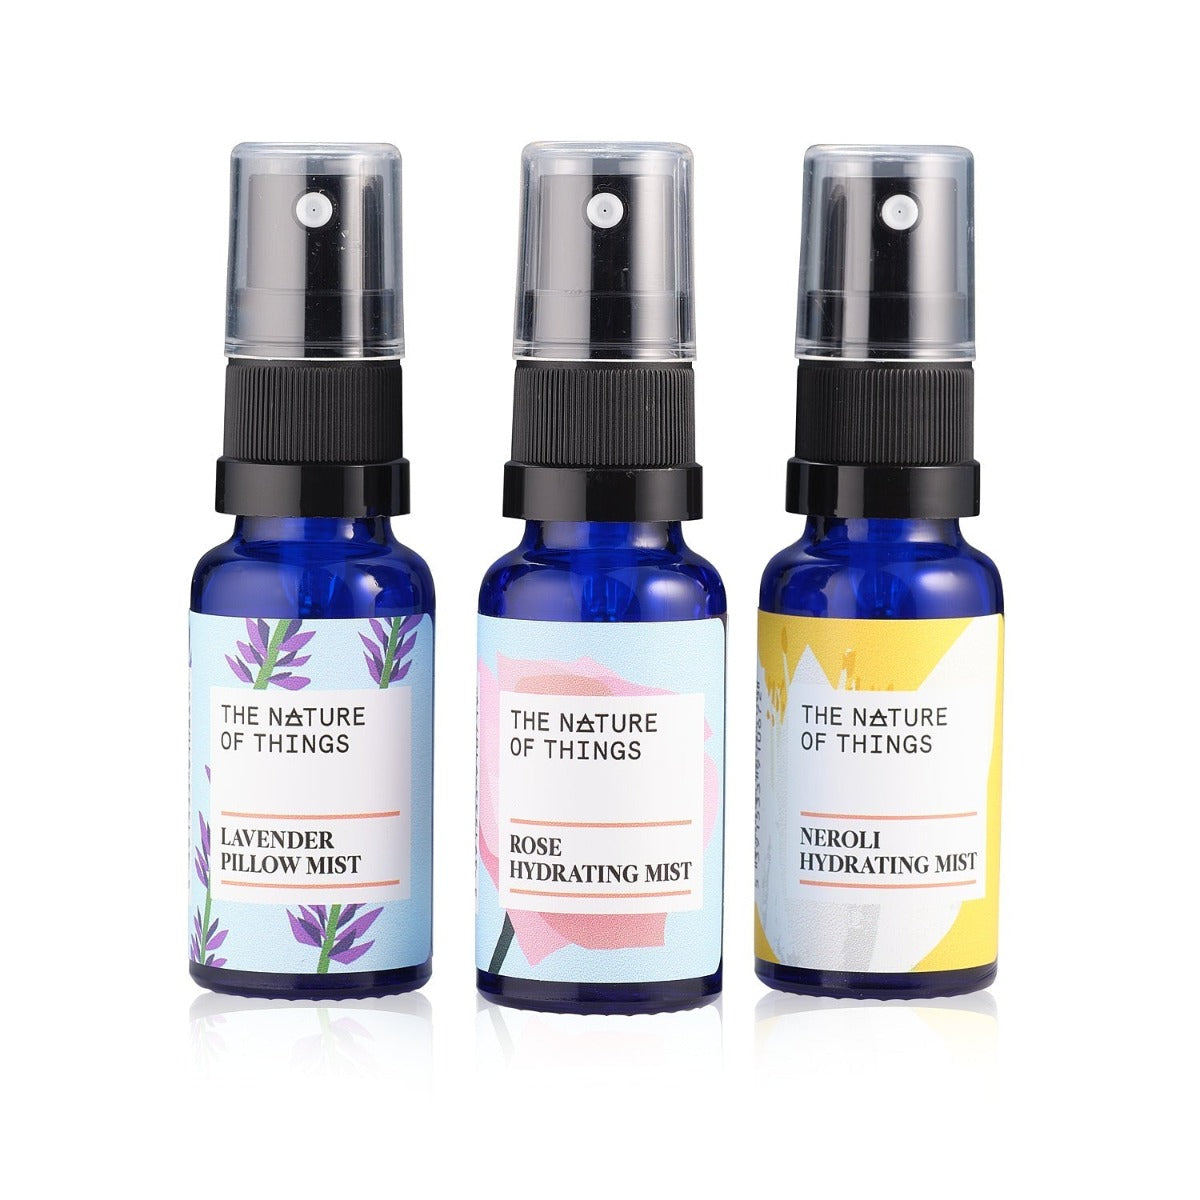 Lavender, Rose and Neroli Mists from The Nature of Things